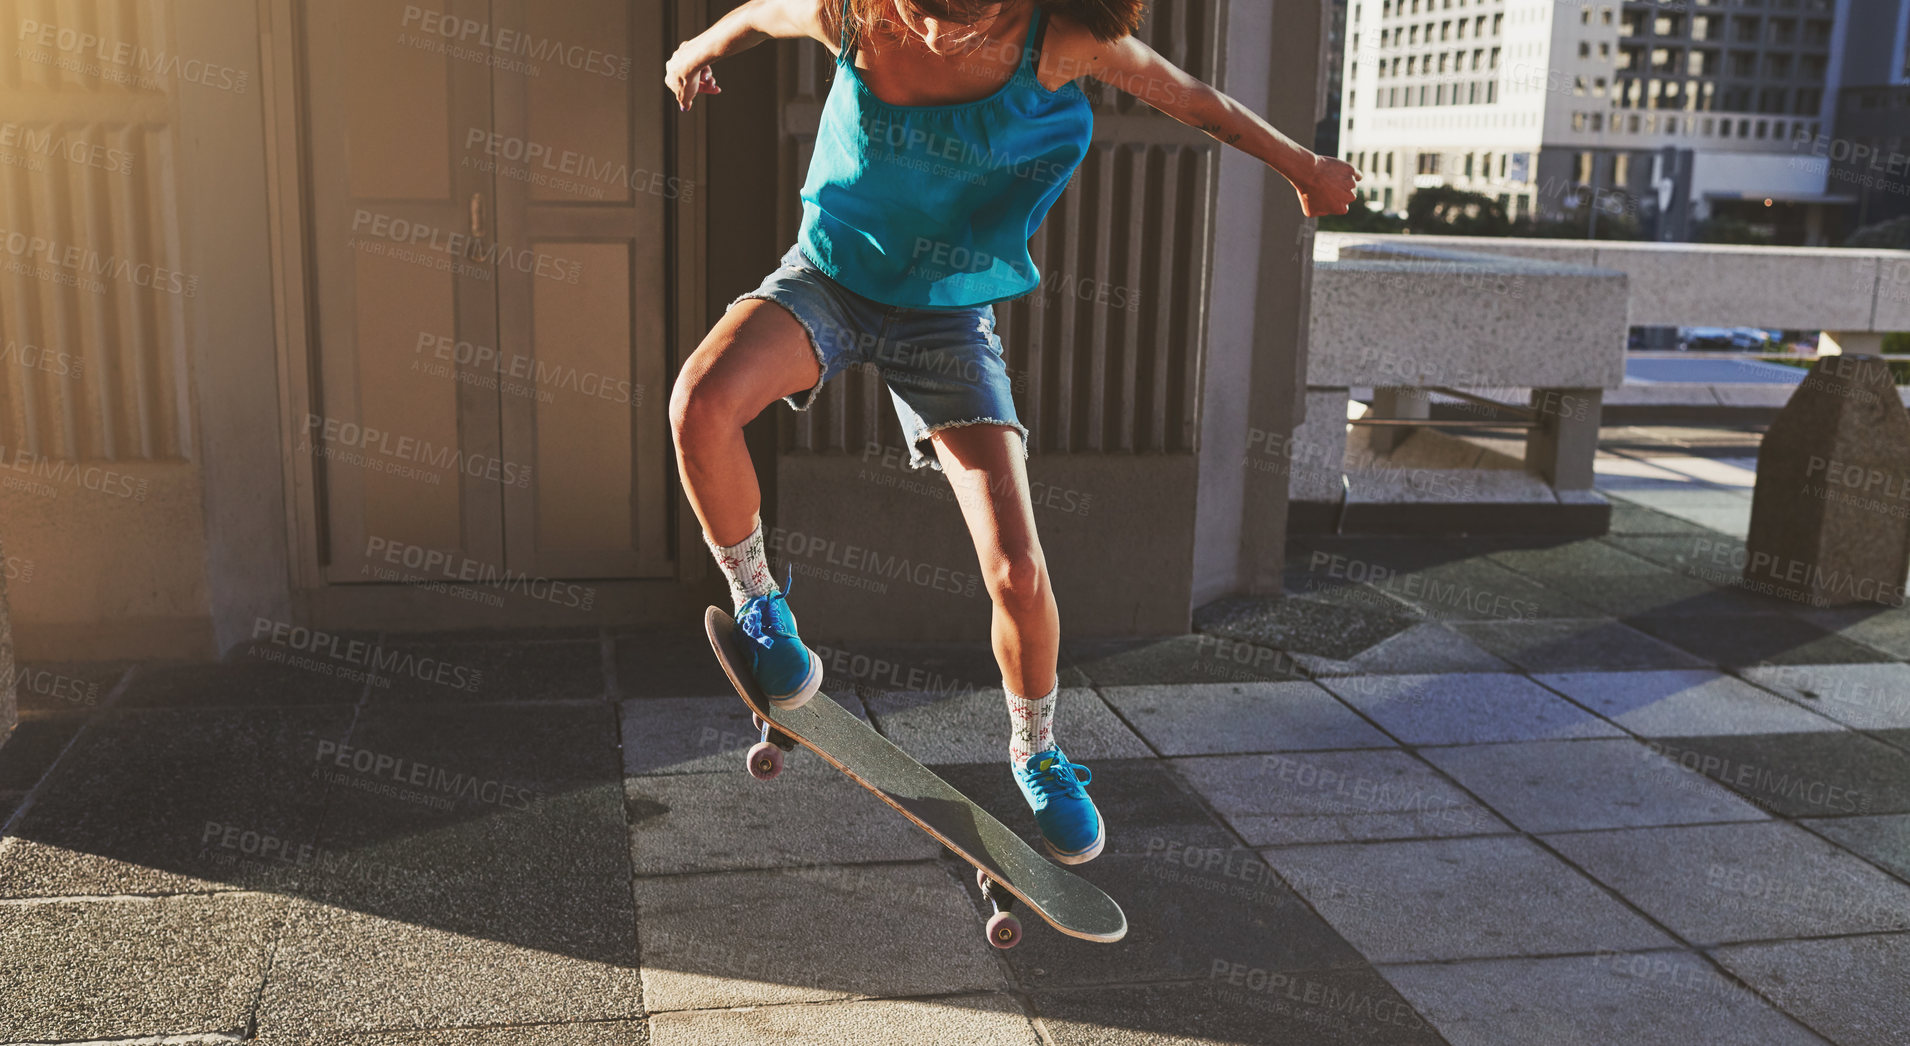 Buy stock photo Cropped shot of a young woman skating in the city